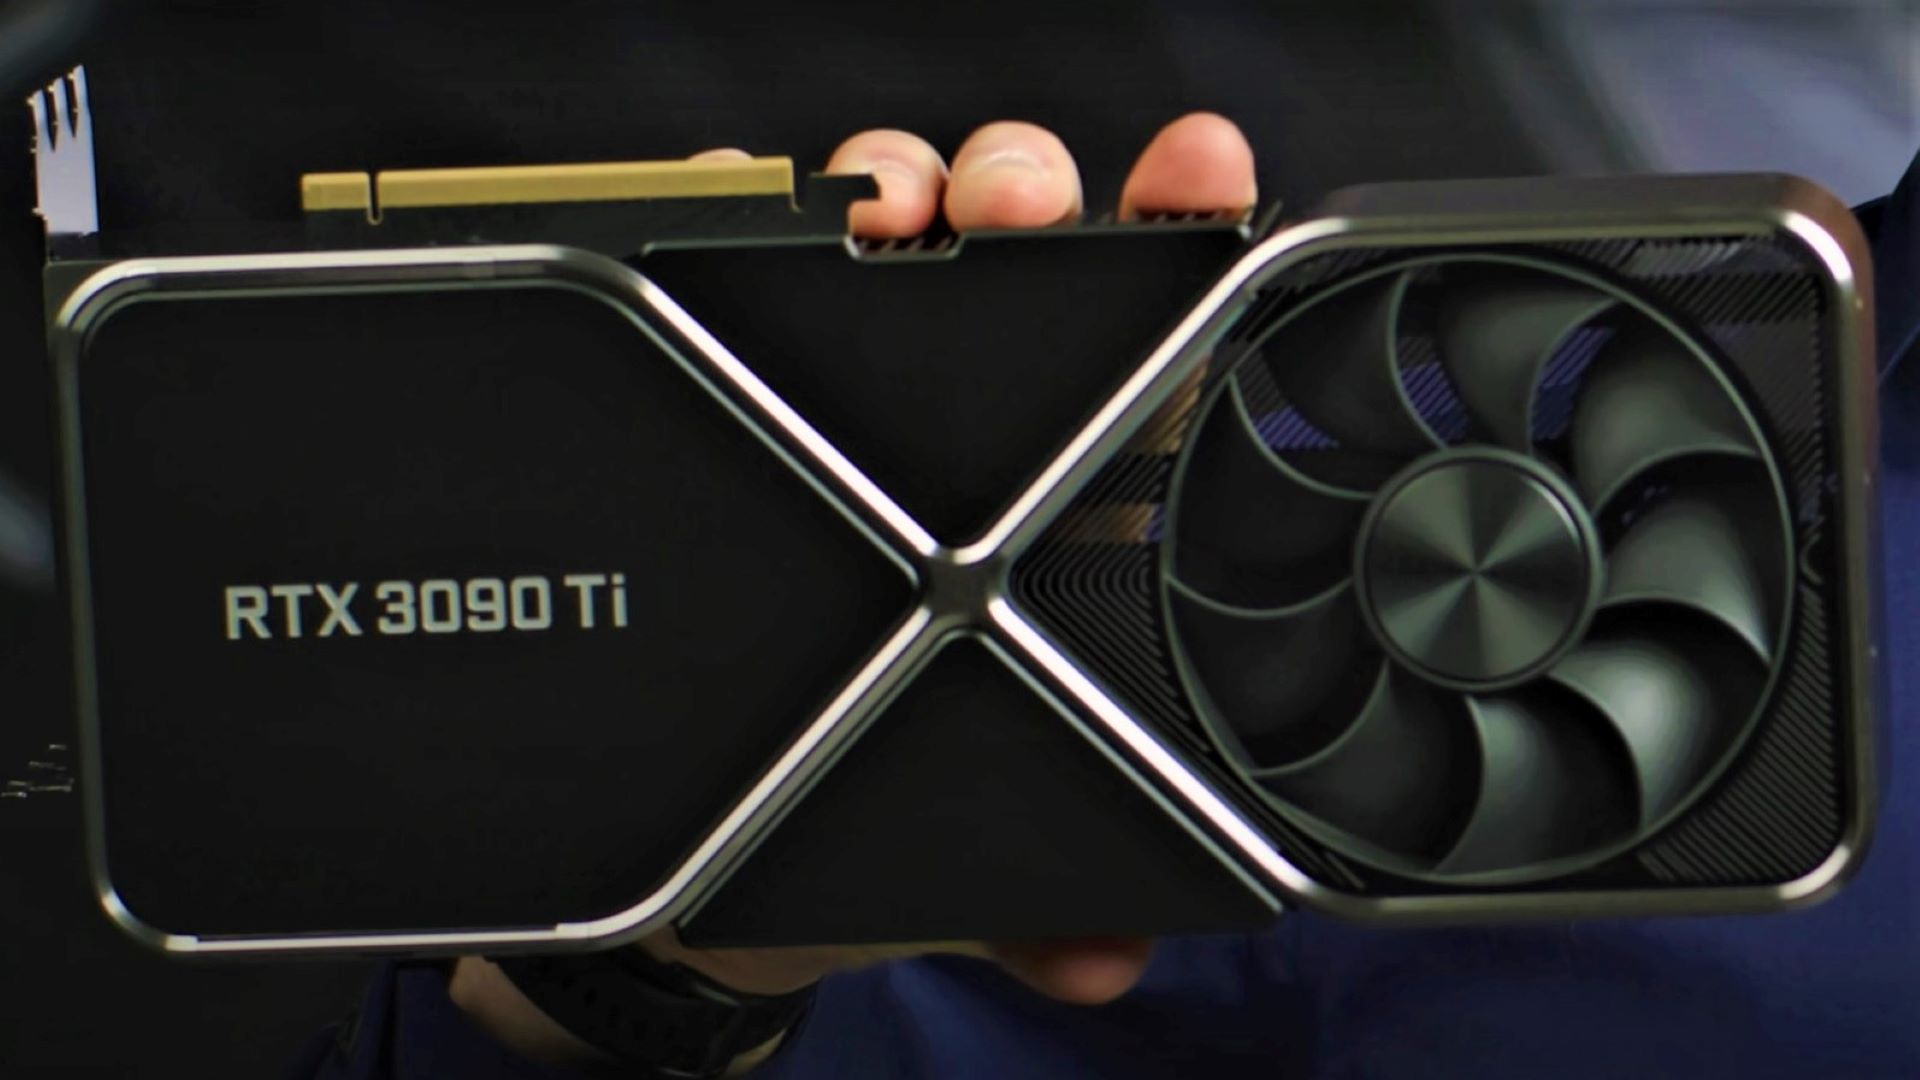 Nvidia RTX 3090 Ti – release date, price, specs, and benchmarks